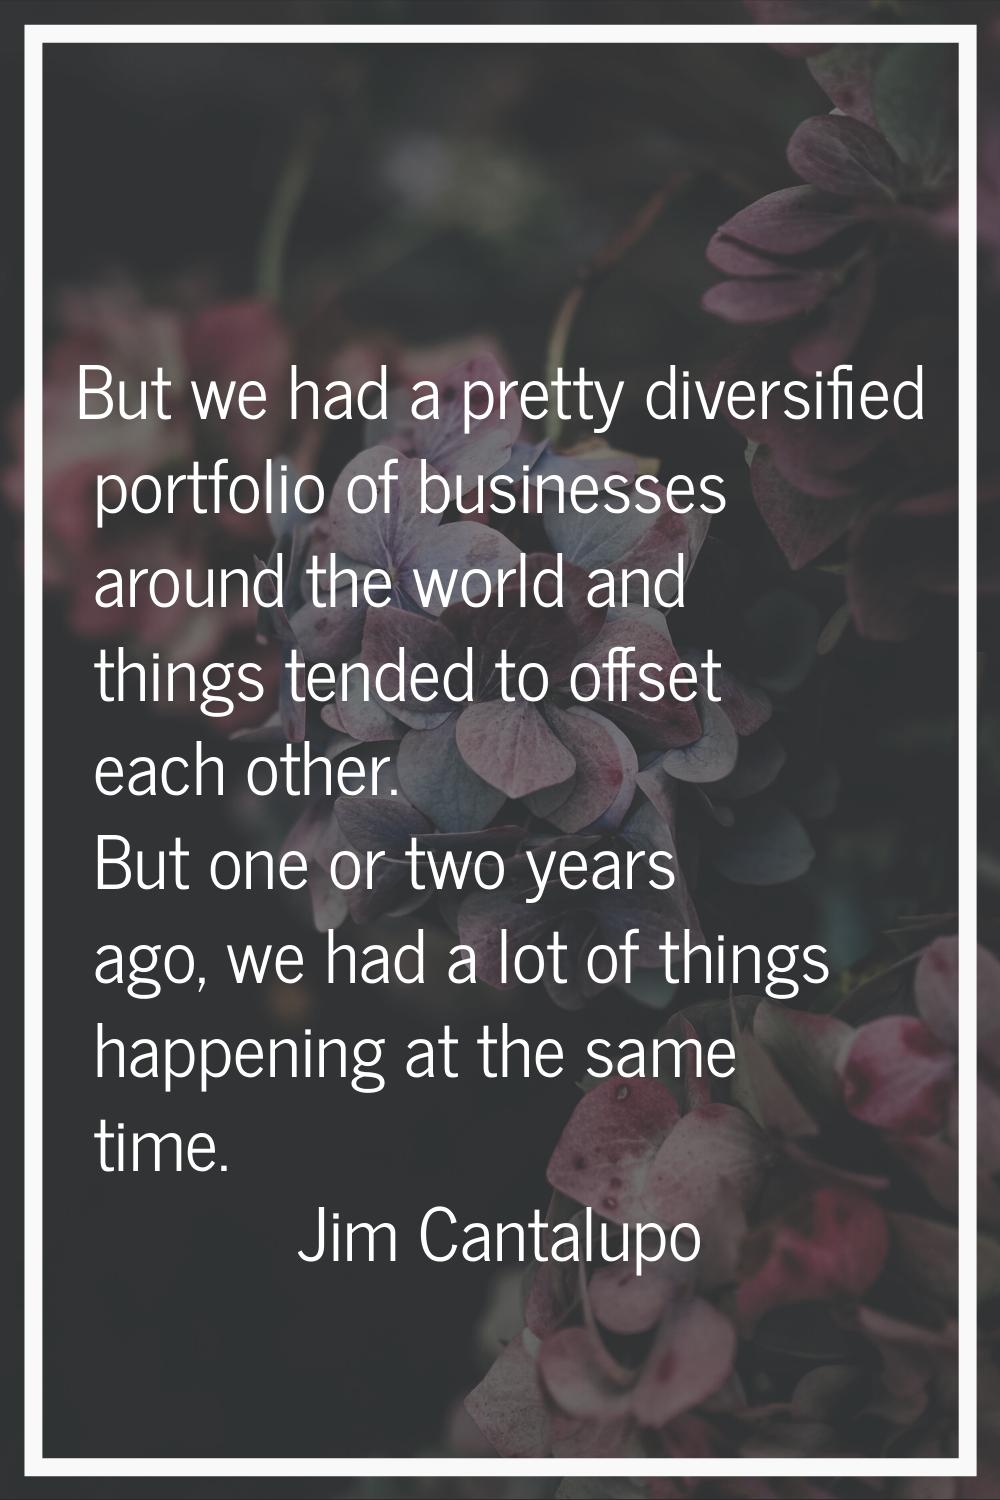 But we had a pretty diversified portfolio of businesses around the world and things tended to offse